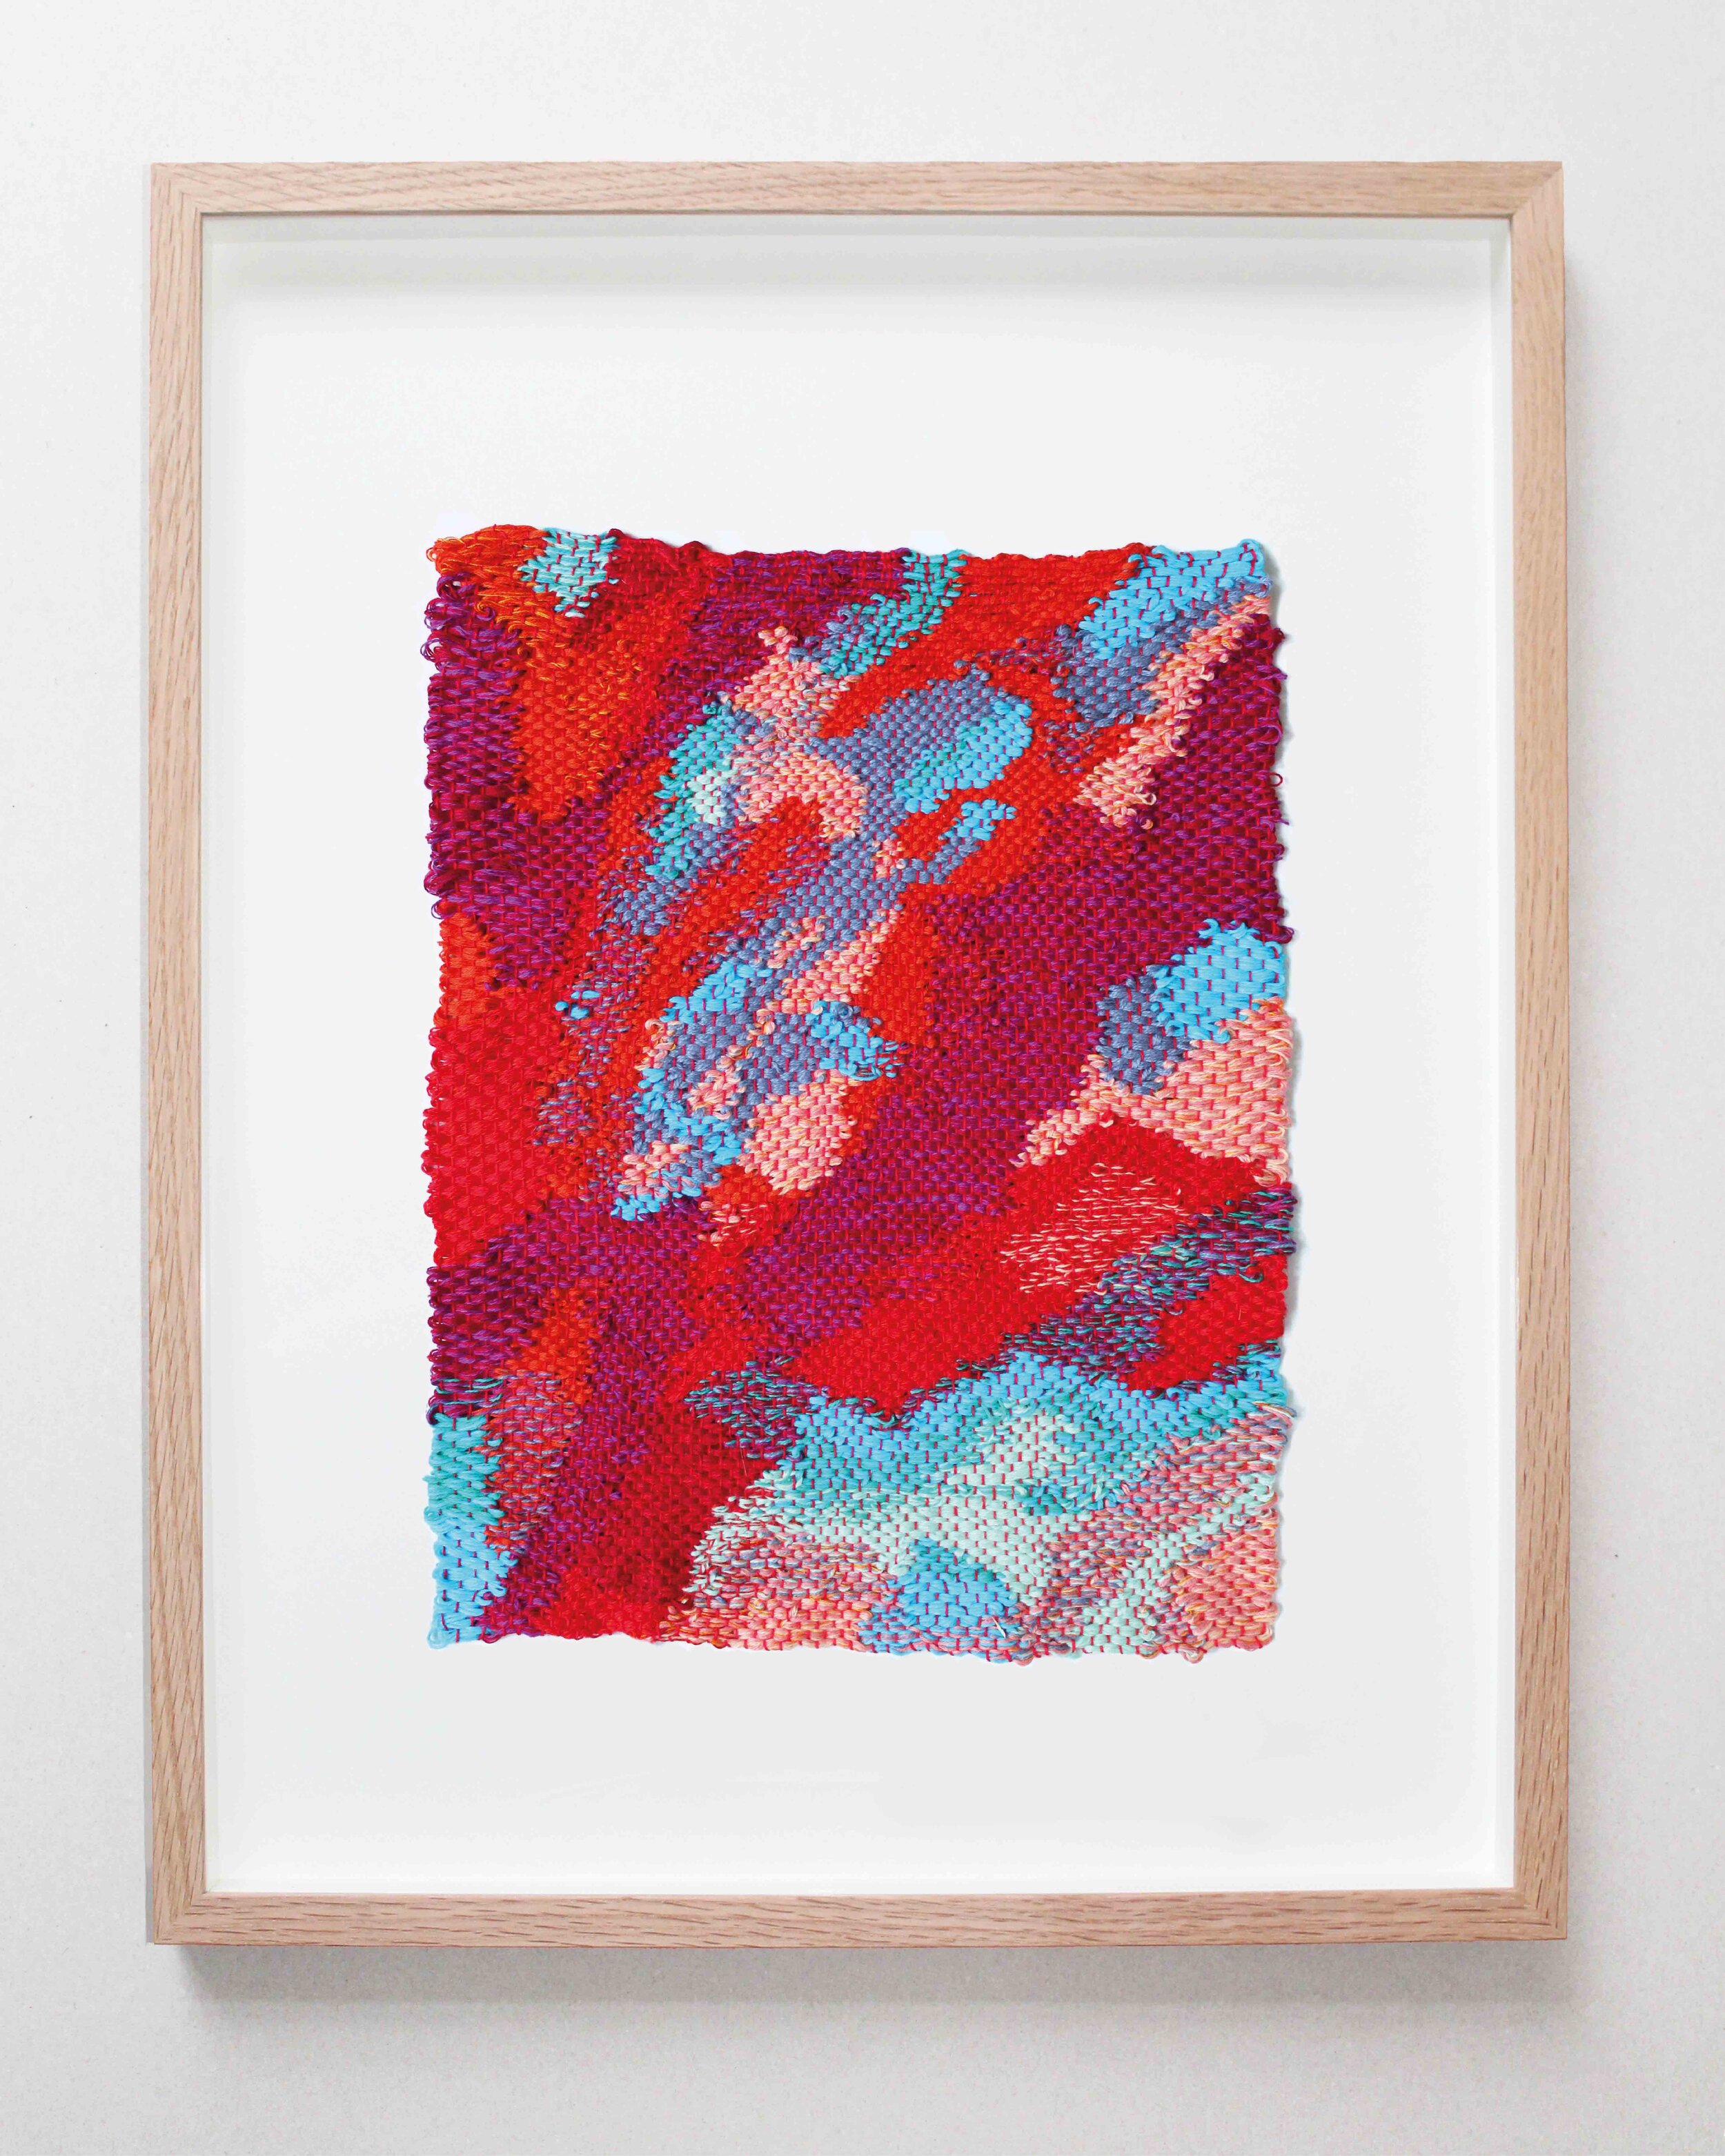 Shake the sky, woven cotton, 28 x 21.5 cm (60 x 40 cm framed), 2021 - low res.jpg